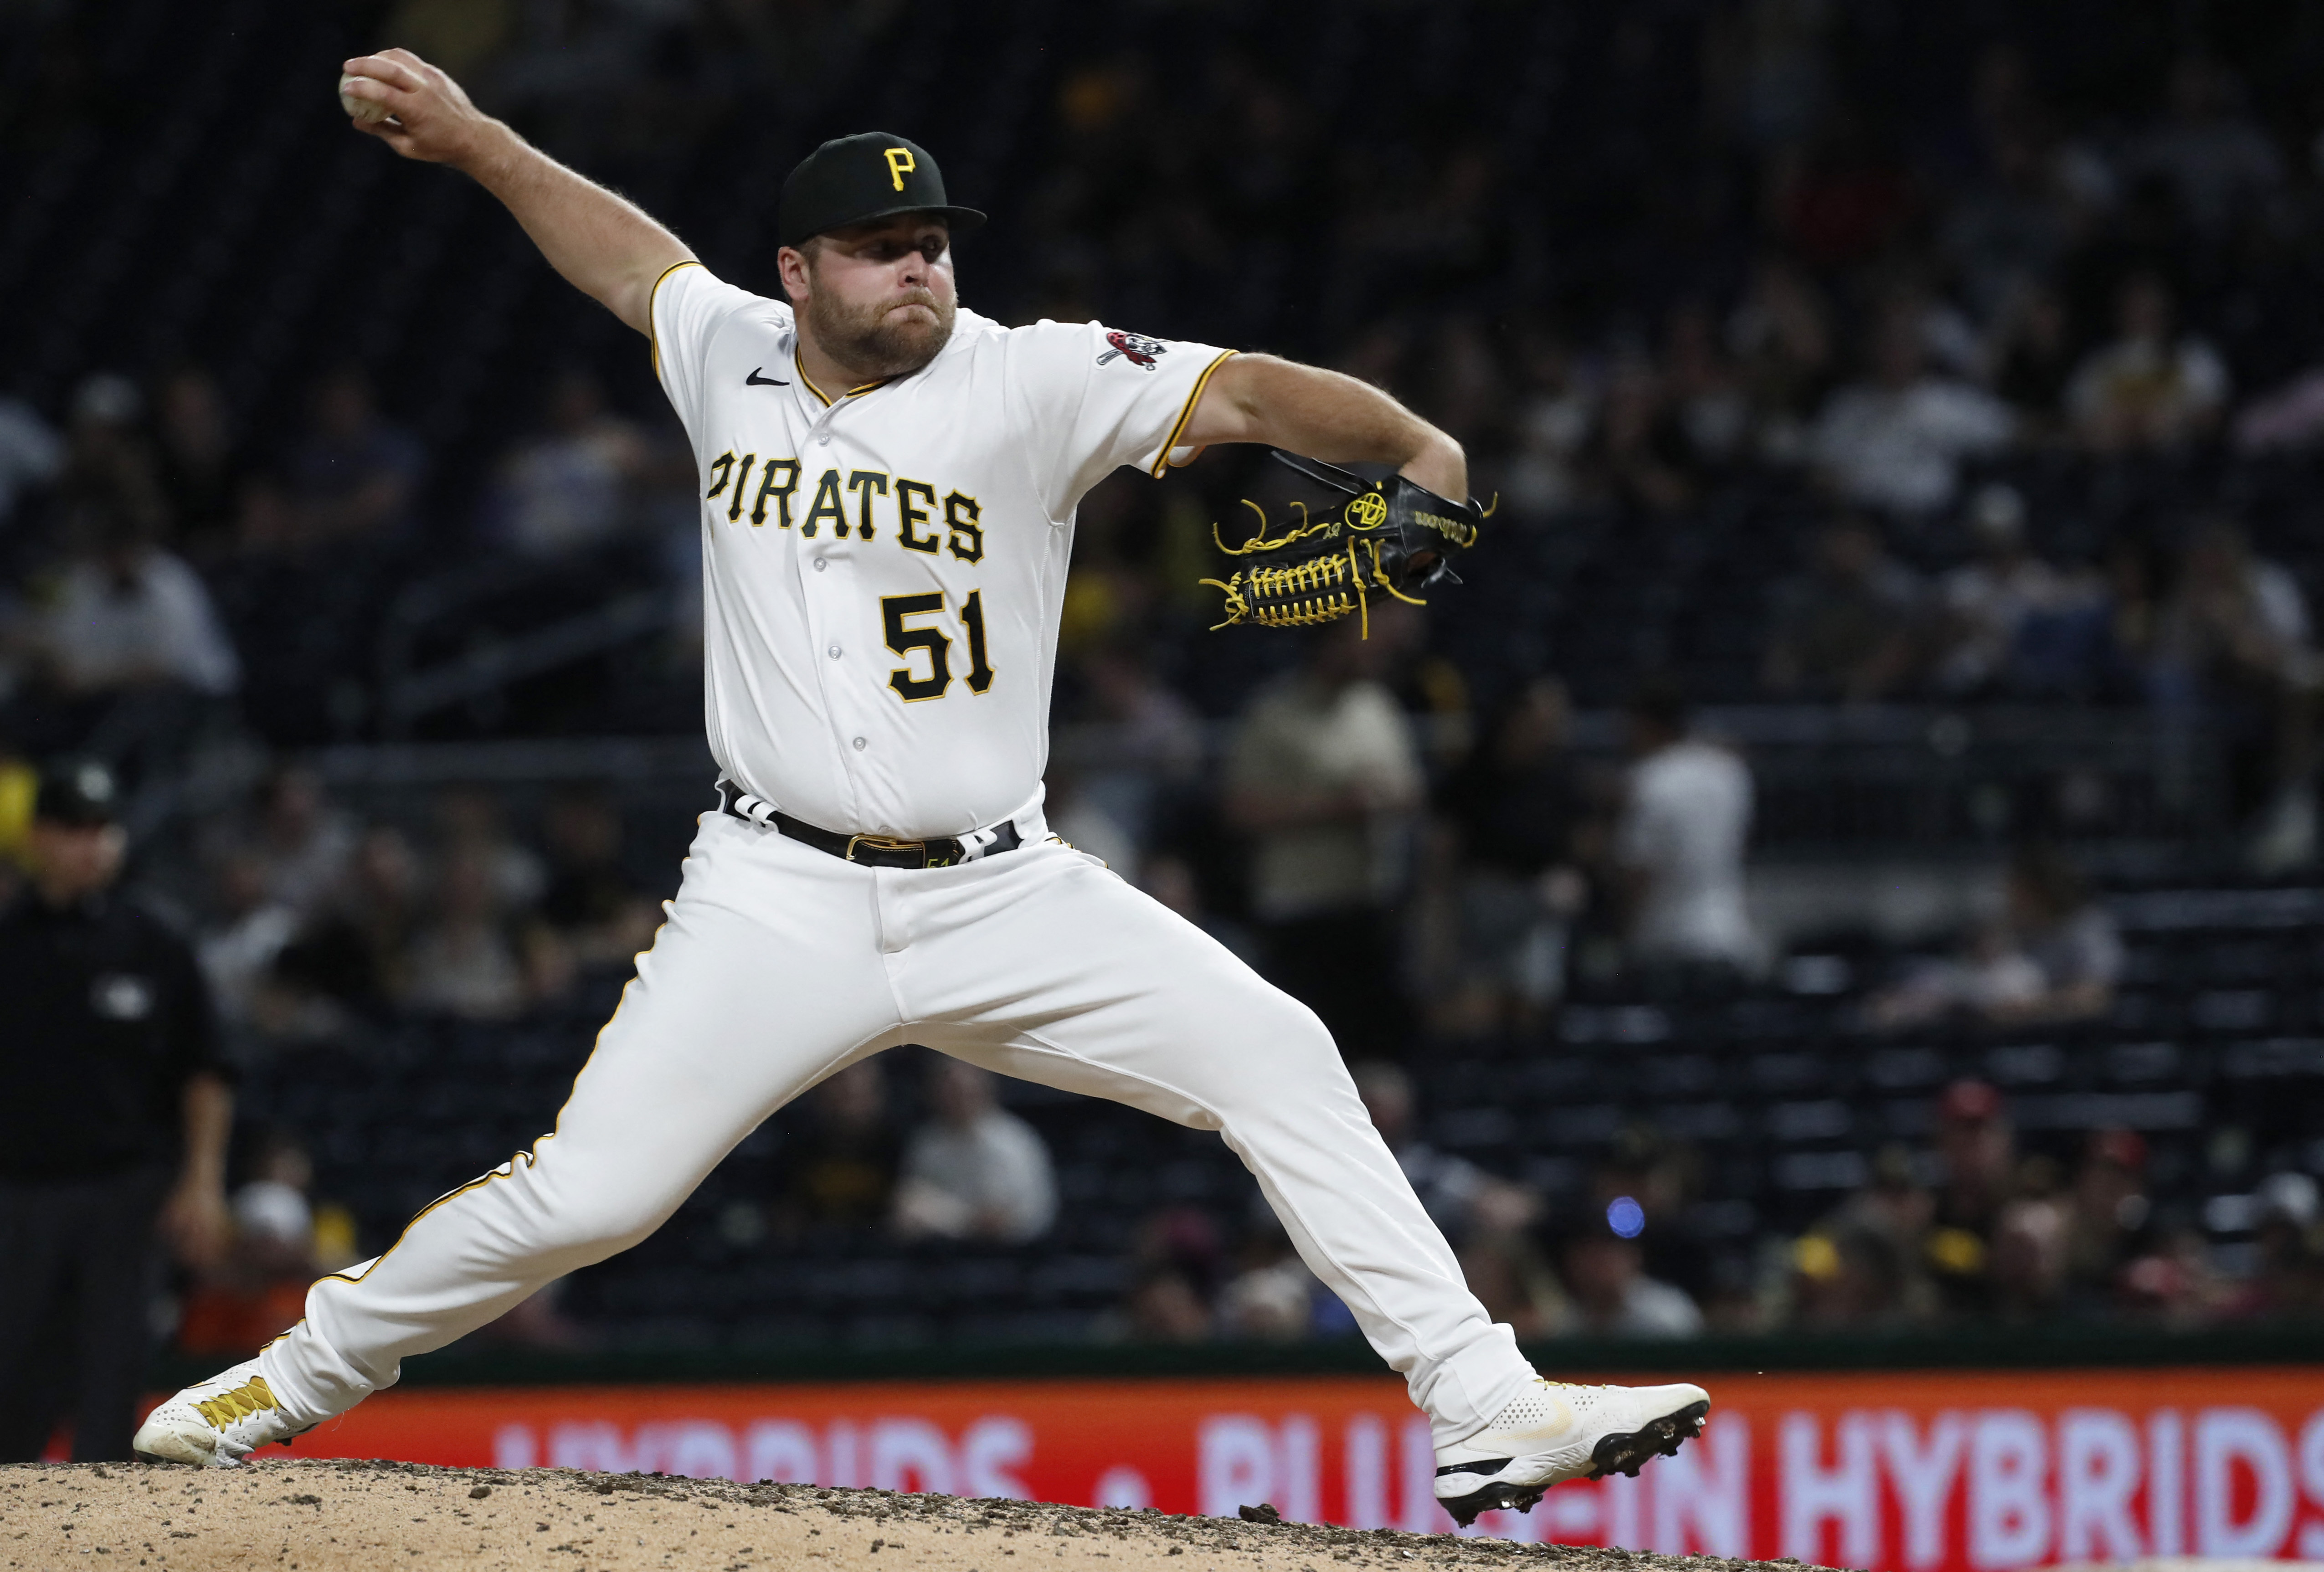 Pirates top Reds to earn fourth straight win